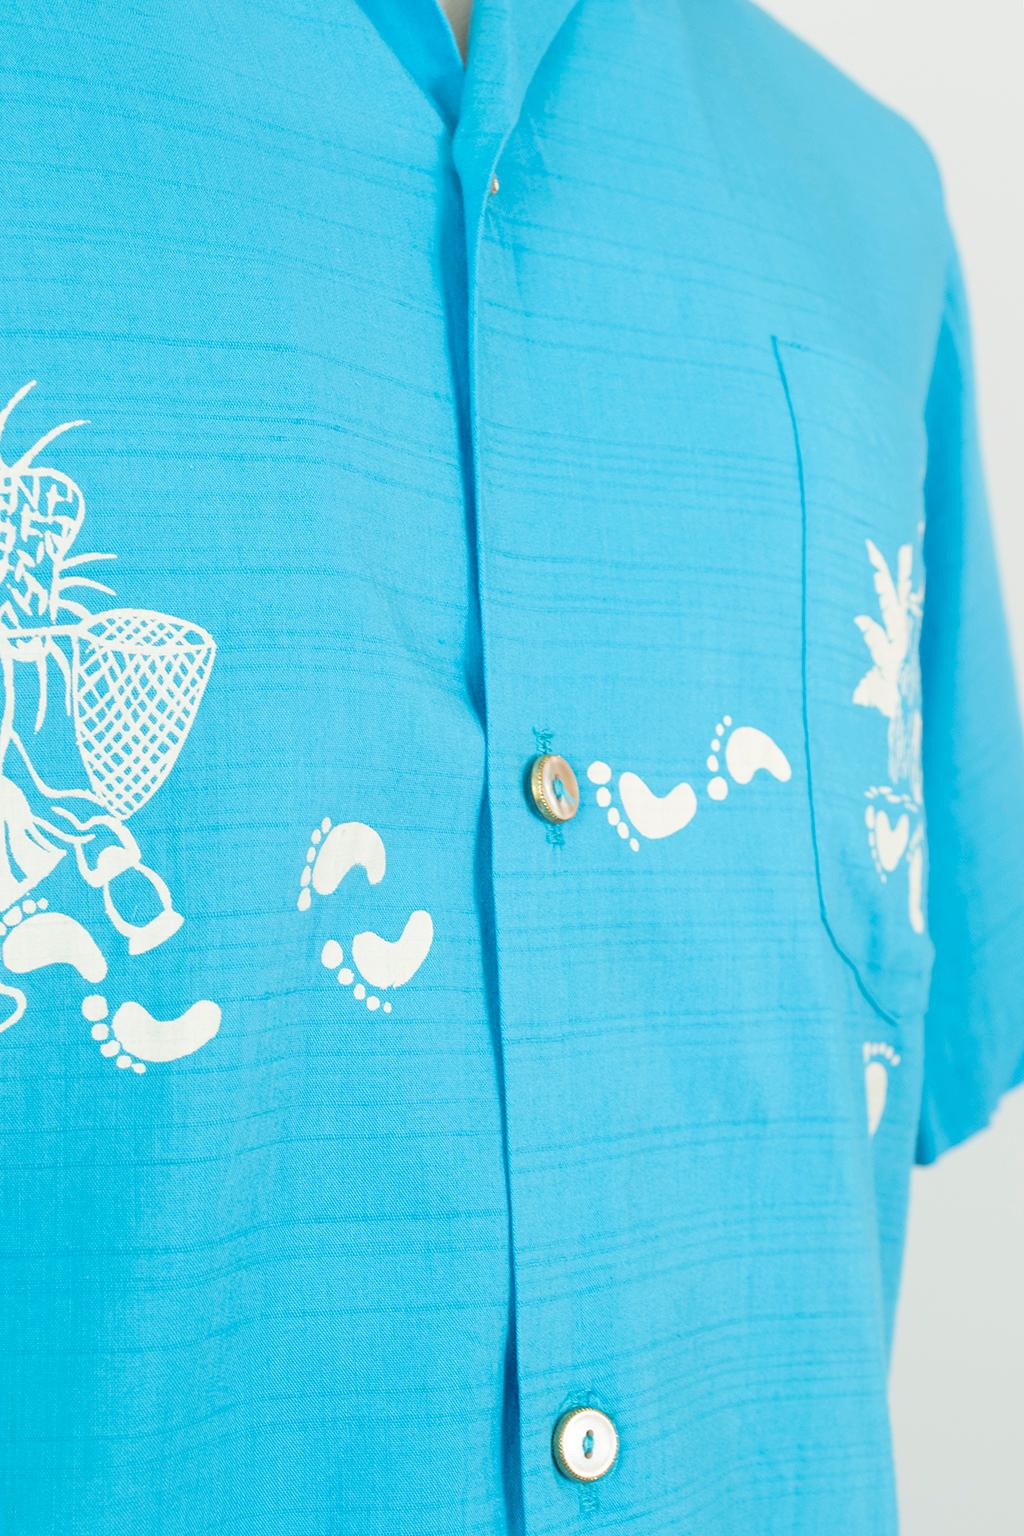 New Men's Iolani Sportswear Painted Turquoise Hawaiian Footprint Shirt–M, 1950s In New Condition For Sale In Tucson, AZ